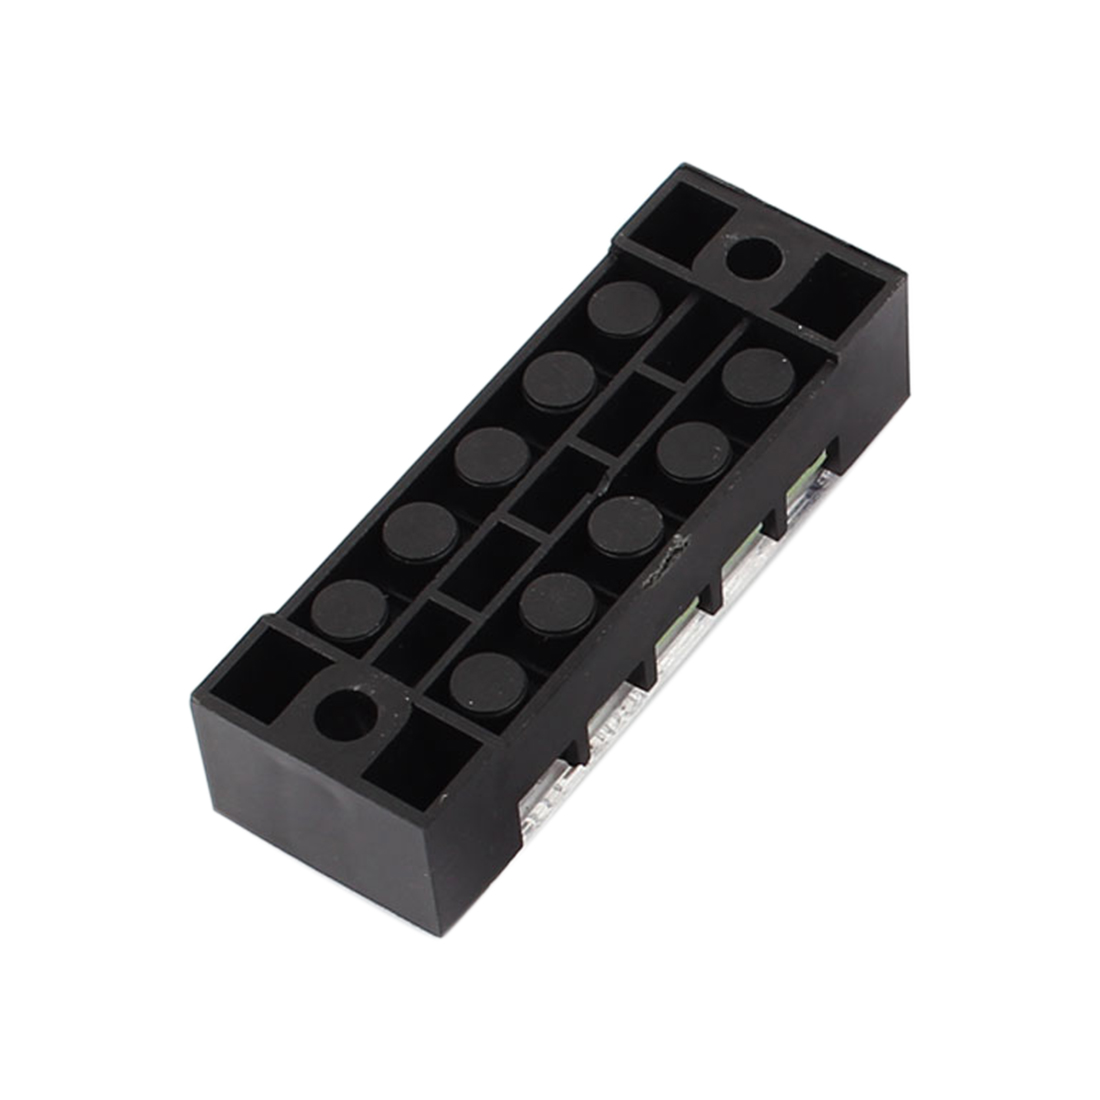 2pcs 600V 15A 5P Dual Row Electric Barrier Terminal Block Cable Connector Bar - image 3 of 4